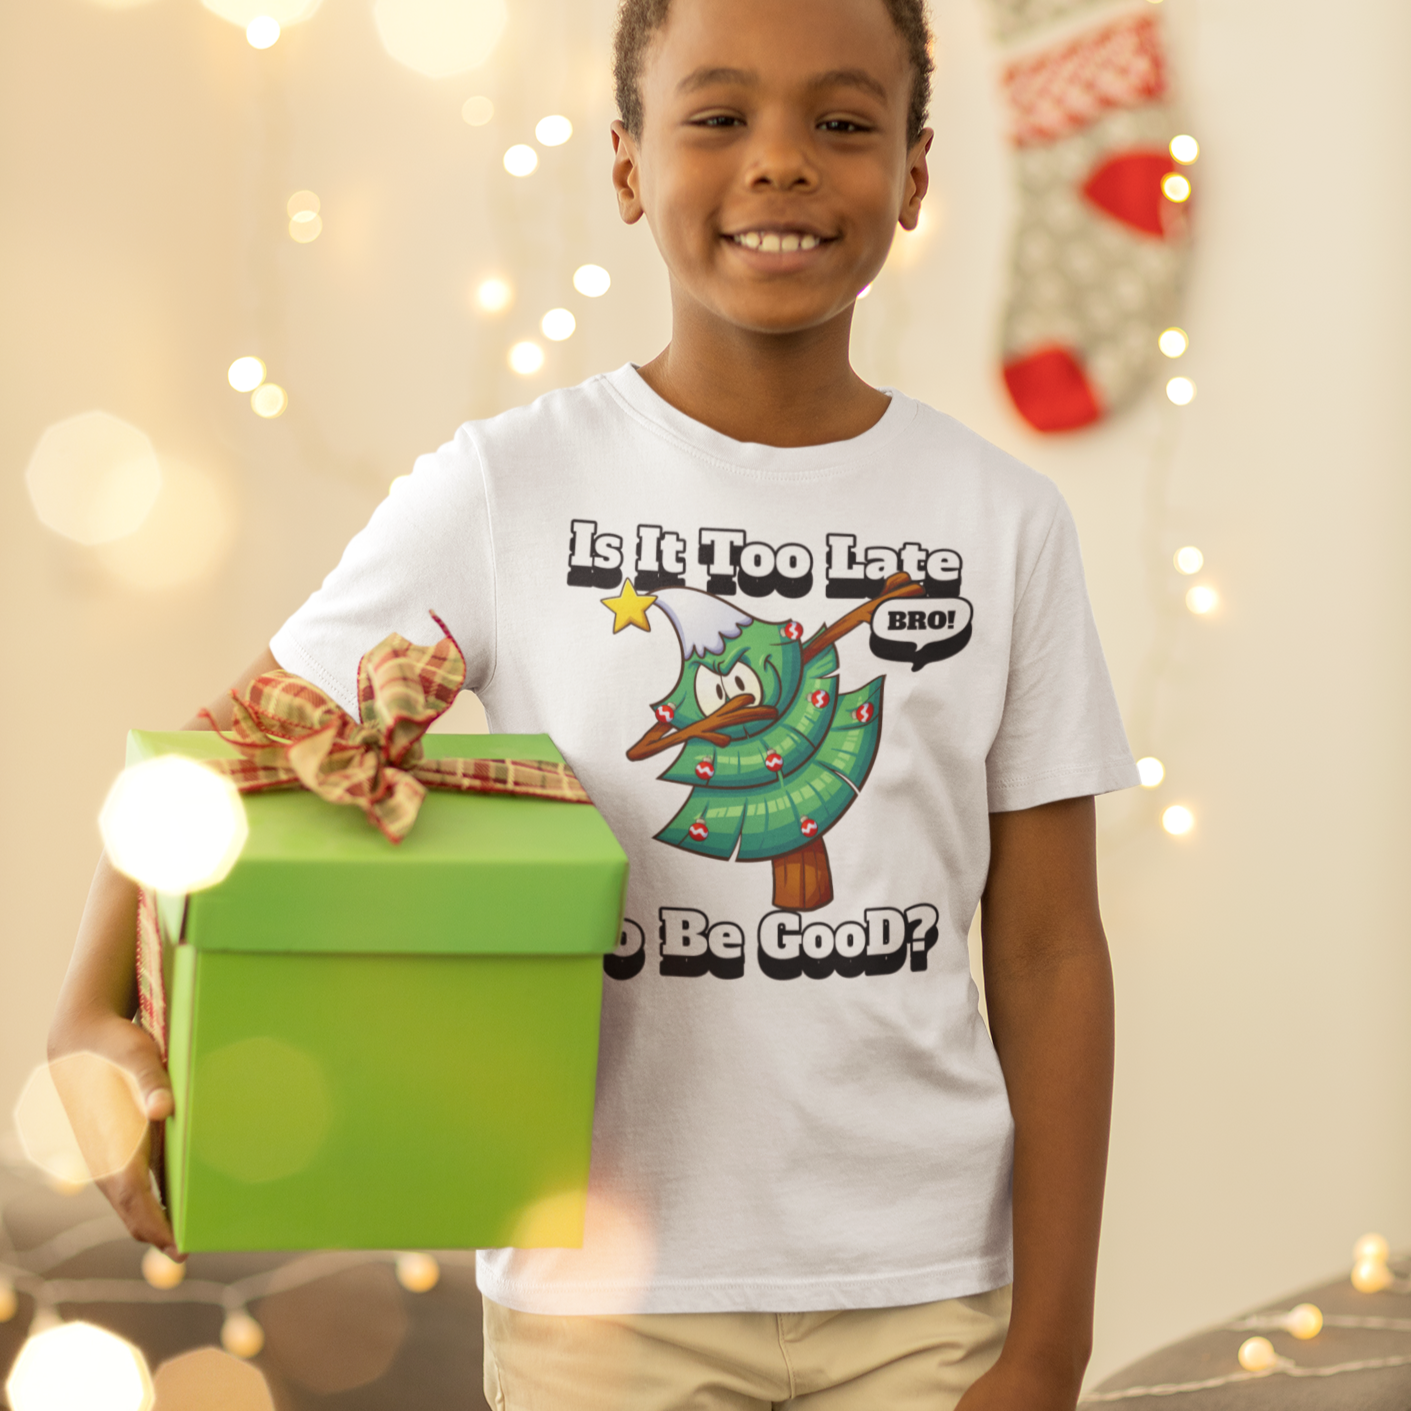 Is it too late to be good? Christmas Shirt - Wilson Design Group